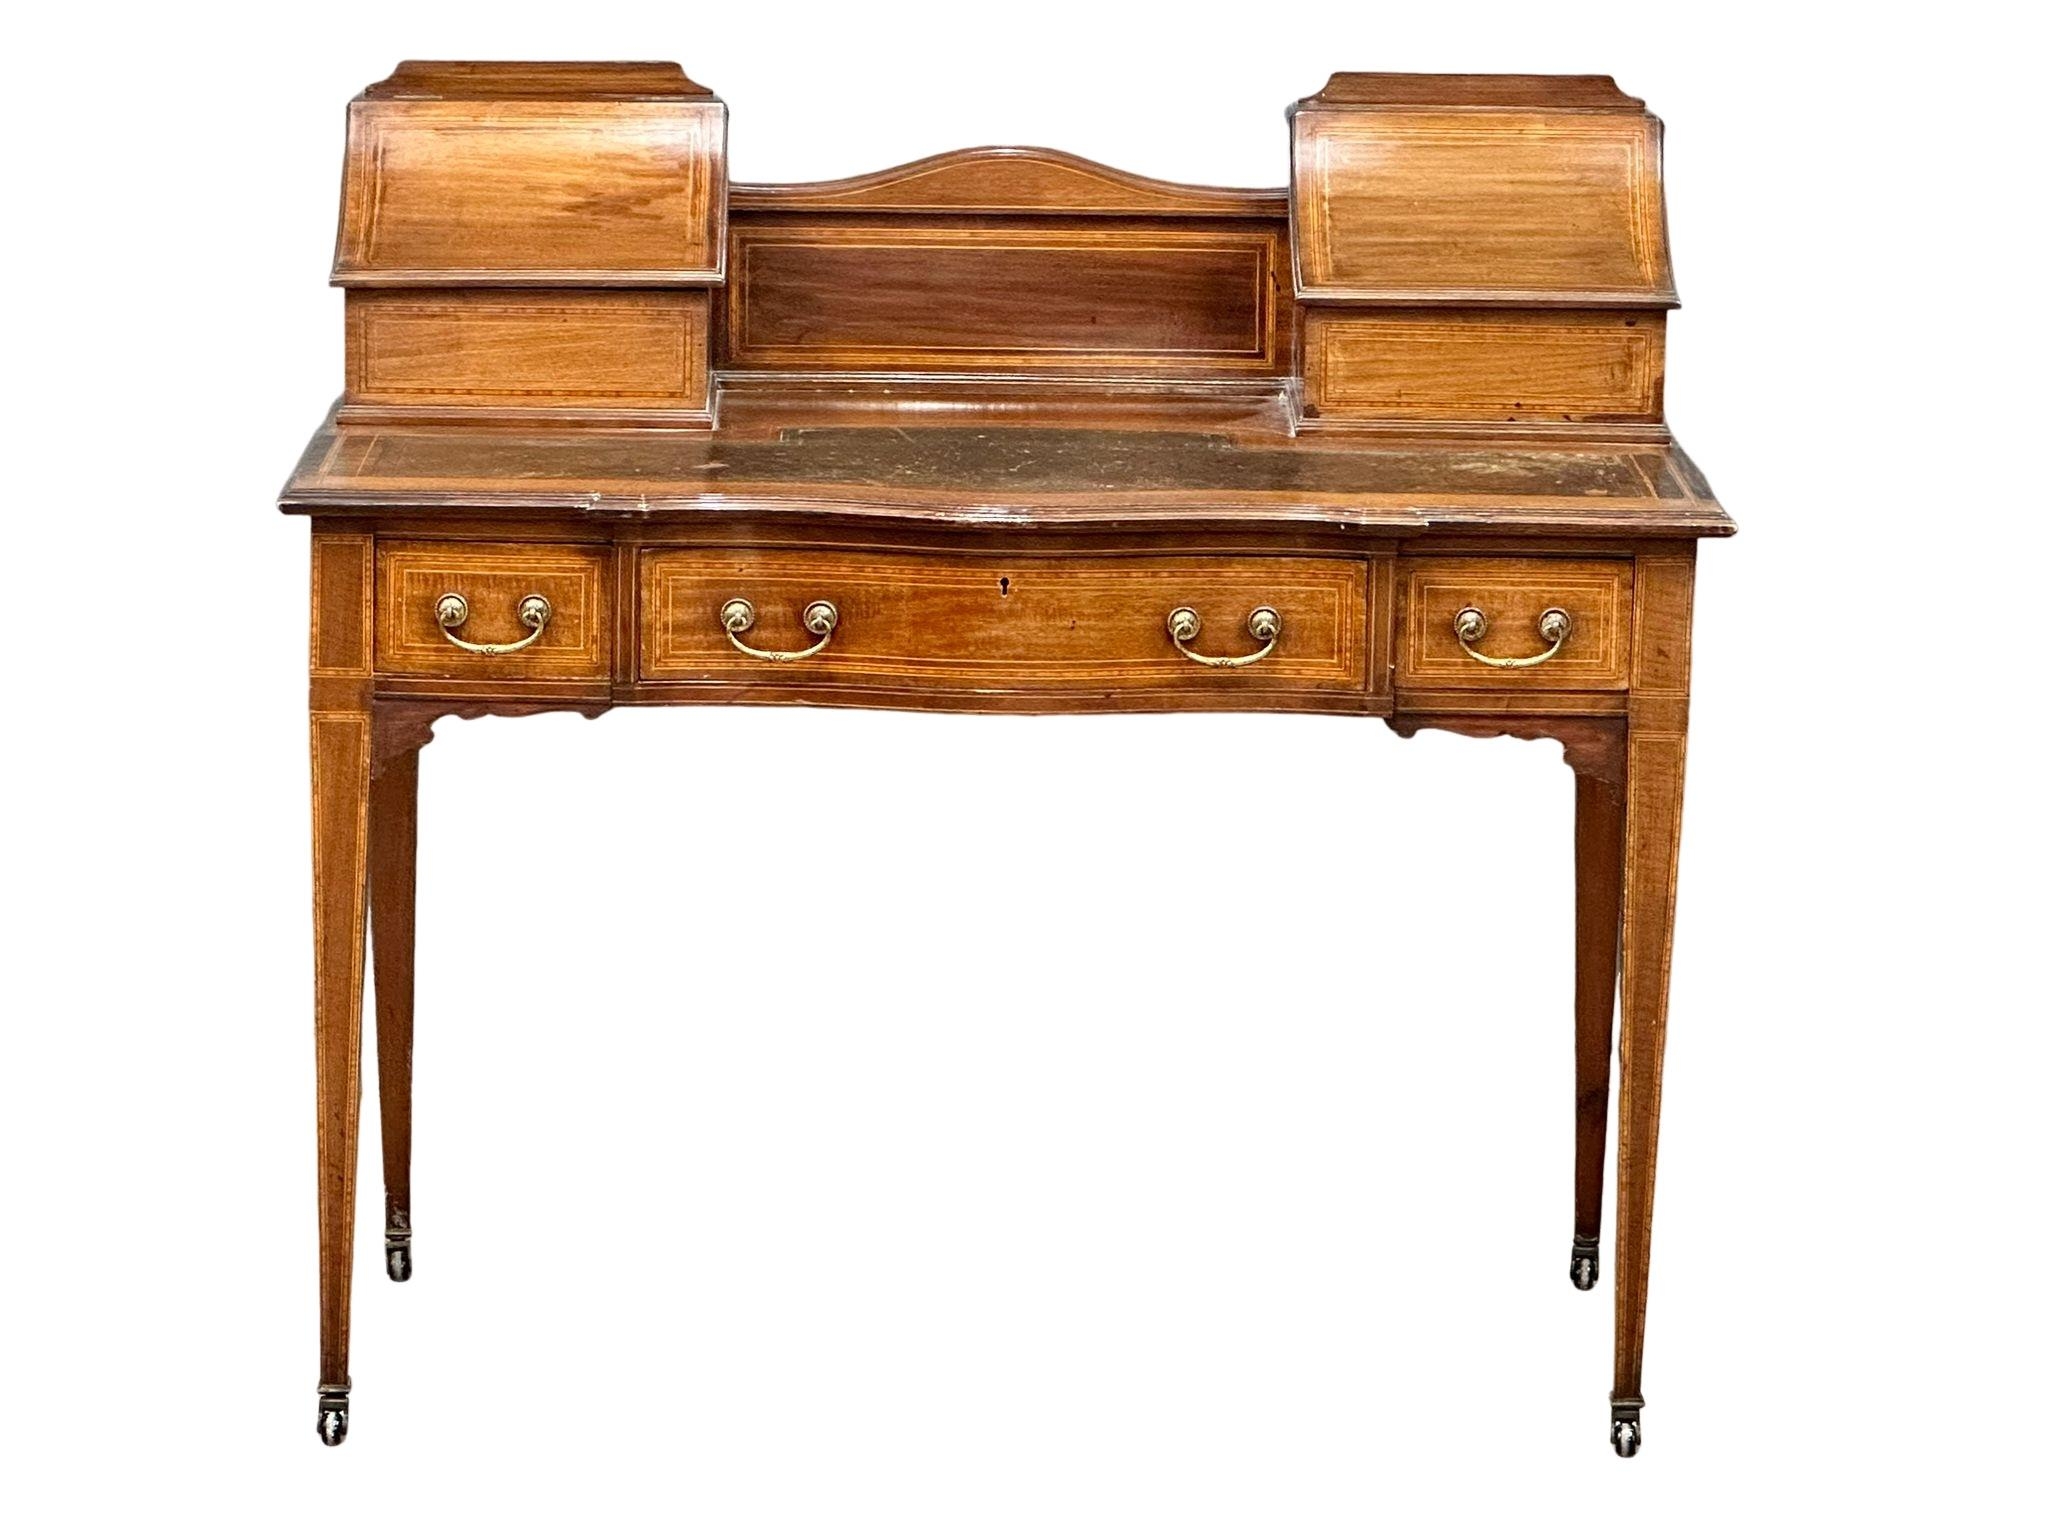 An early 20th century Sheraton Revival inlaid mahogany writing desk with leather top and 3